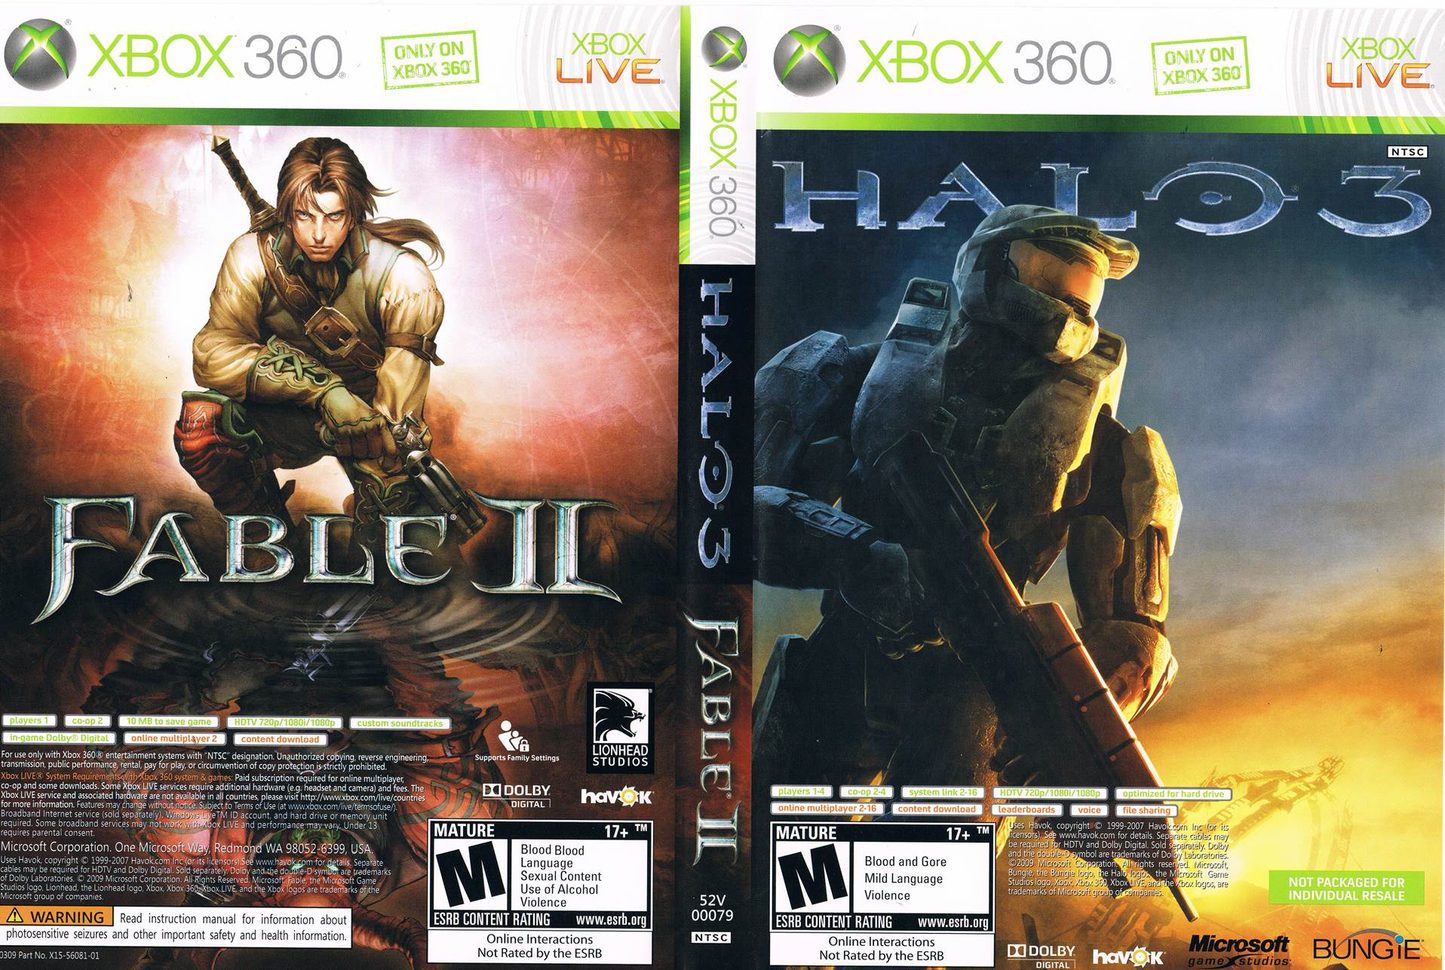 Halo 3 + Fable 2 Double Pack - Xbox 360